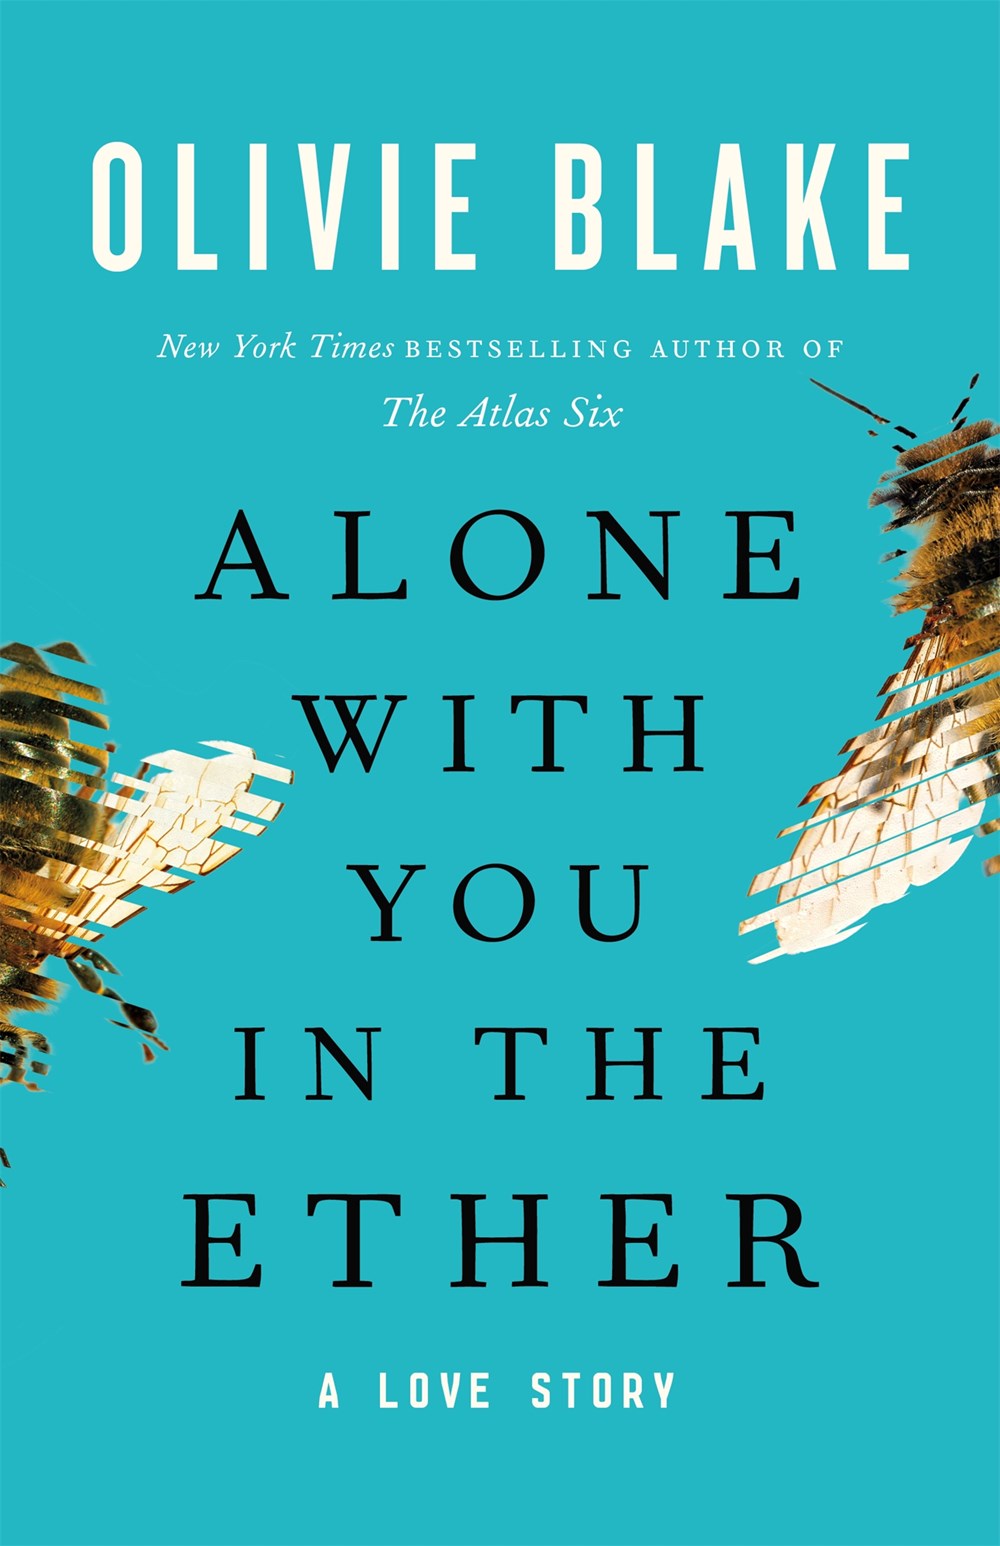 Alone With You In The Ether: A Love Story by Olivie Blacke (Paperback) (PREORDER)